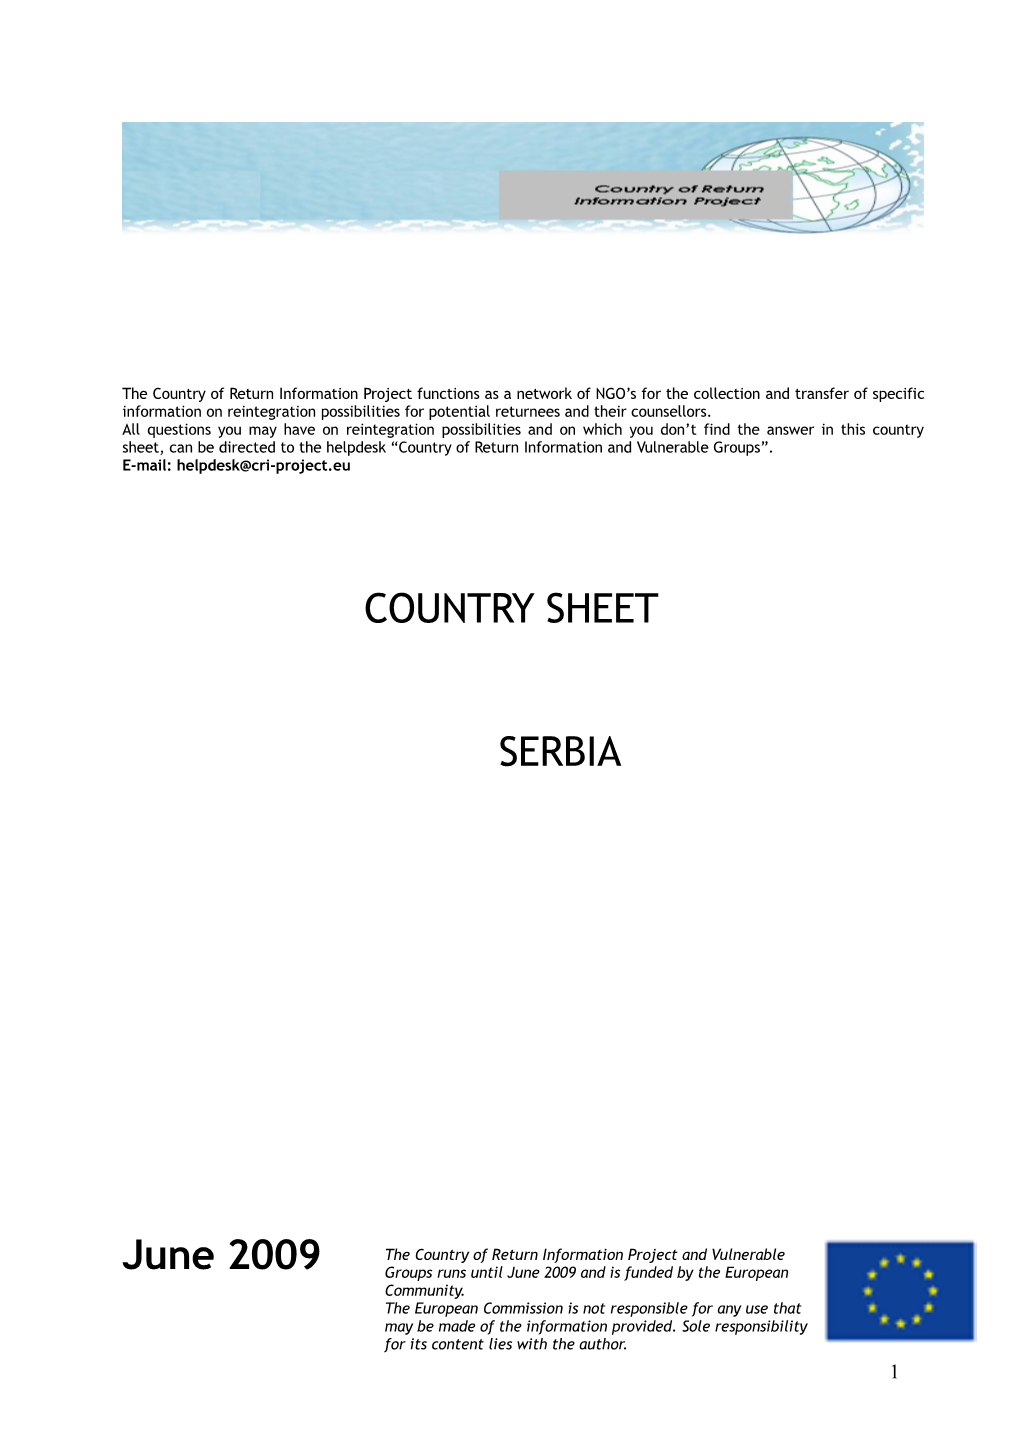 COUNTRY SHEET SERBIA June 2009